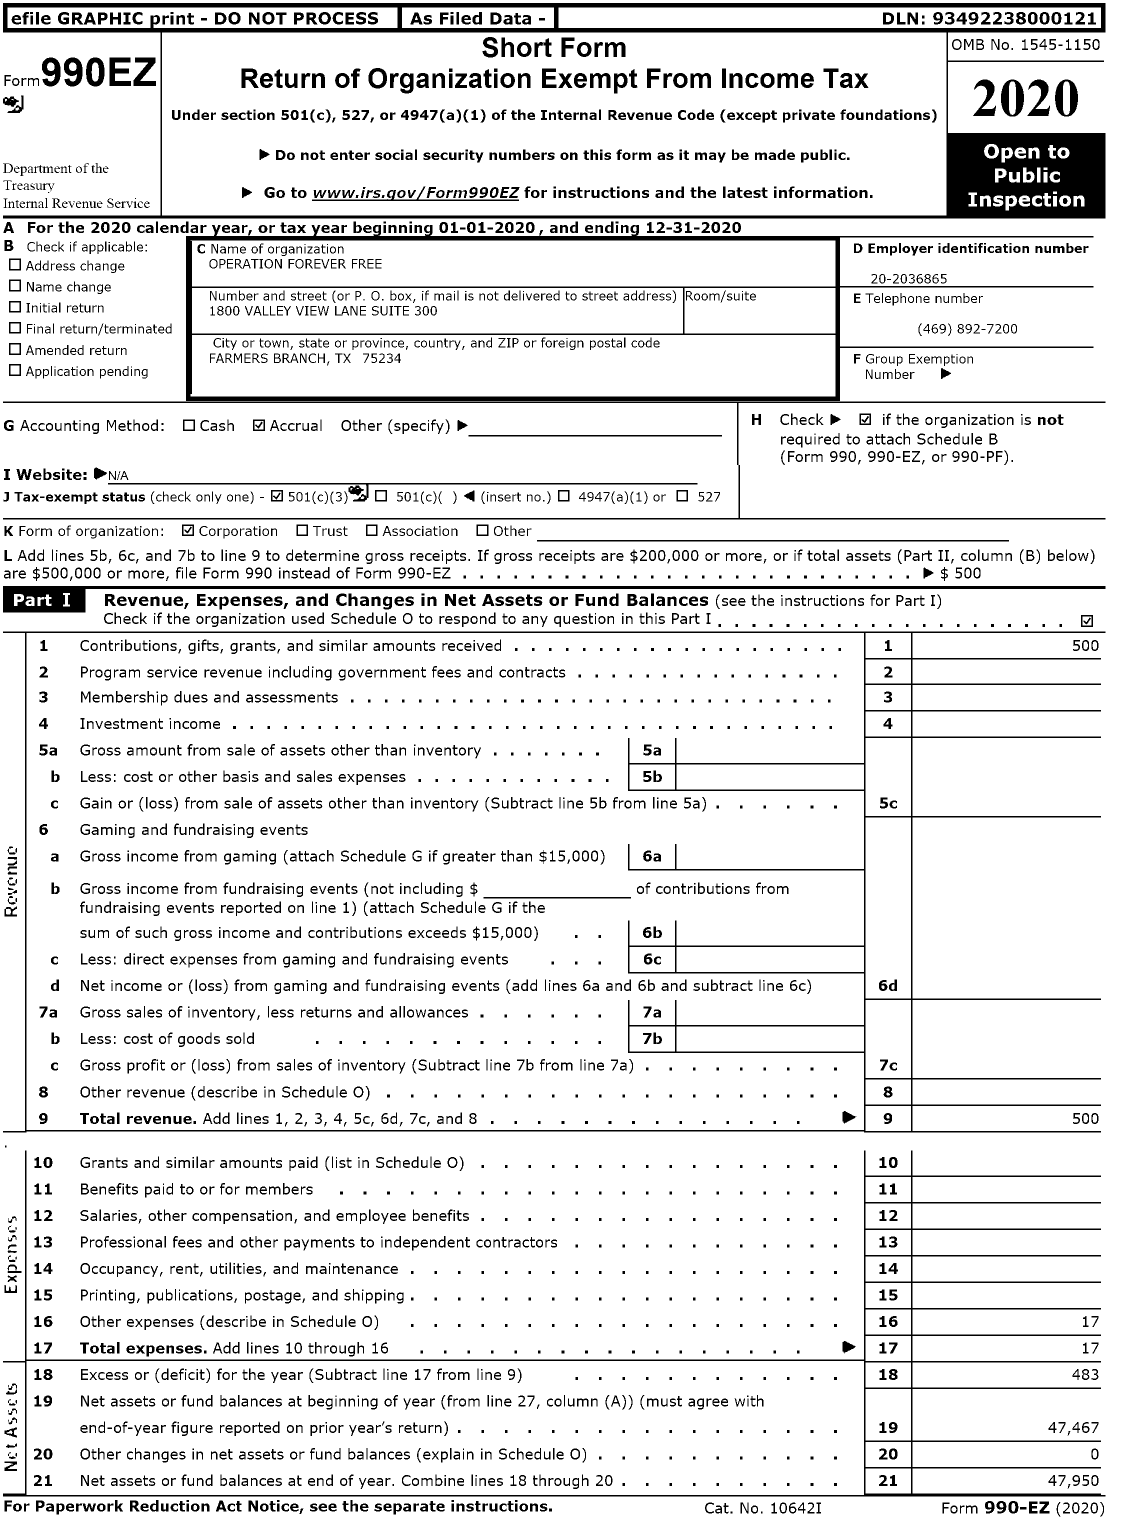 Image of first page of 2020 Form 990EZ for Operation Forever Free